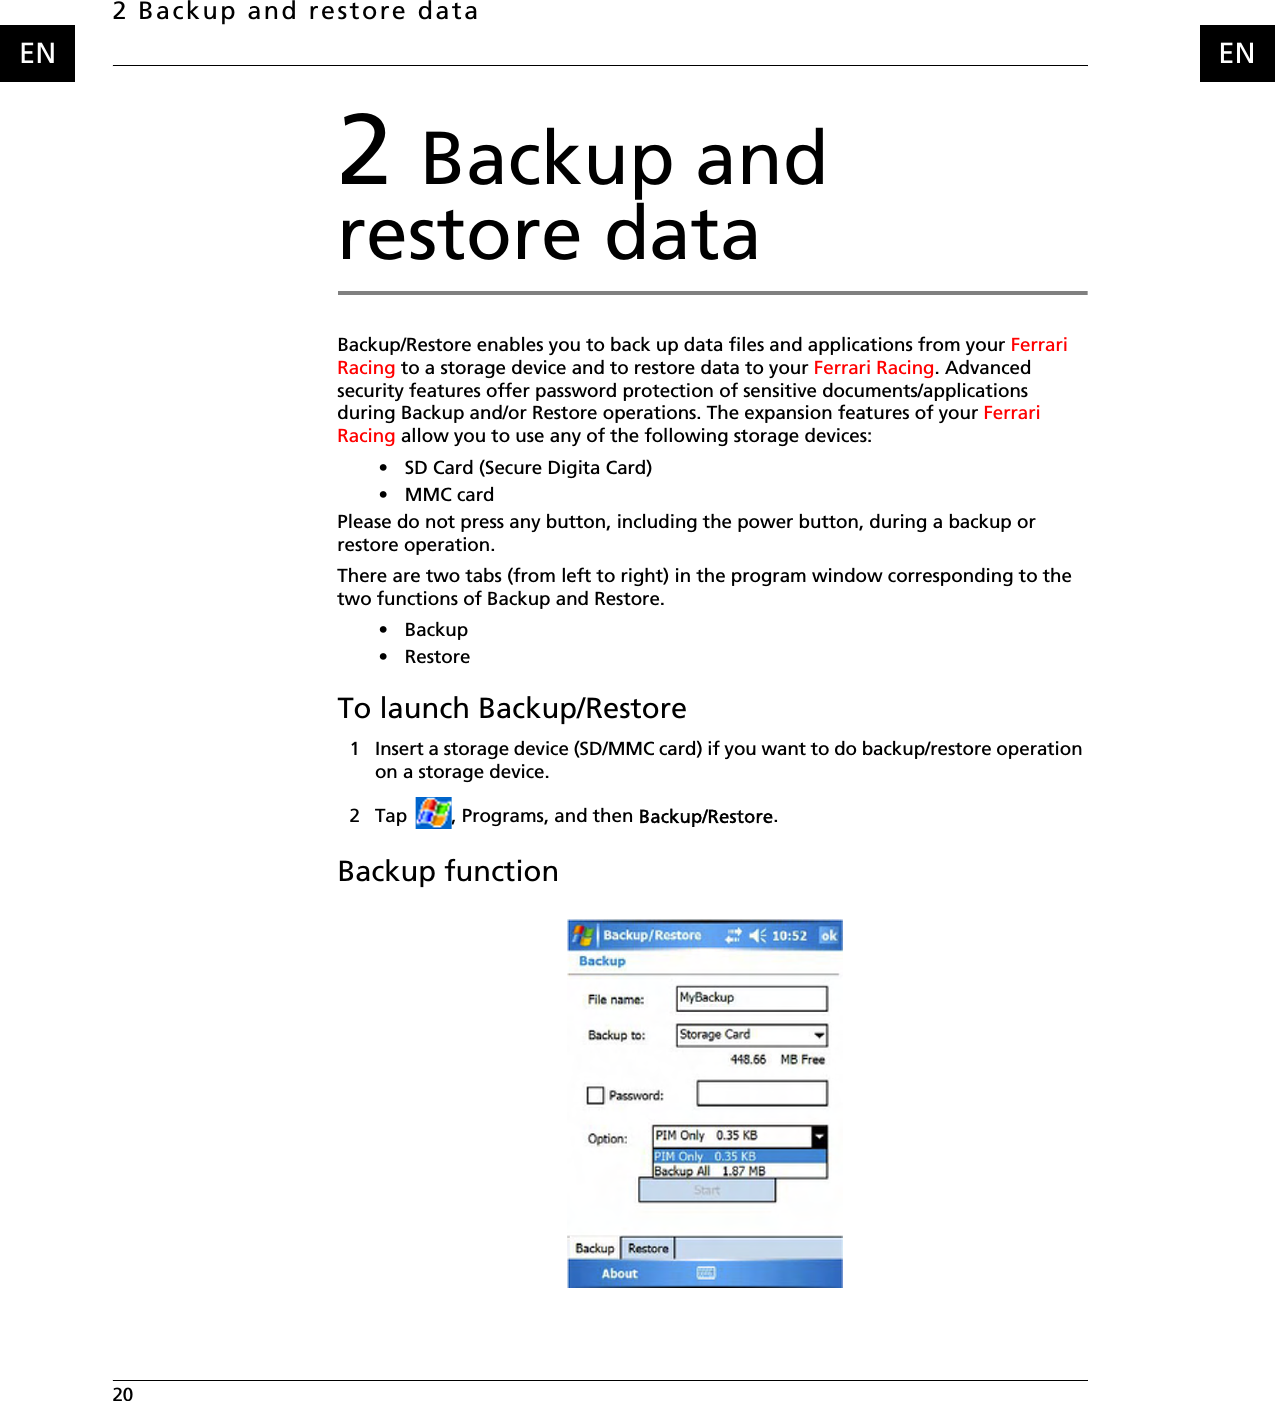 2 Backup and restore data20    ENEN2 Backup and restore dataBackup/Restore enables you to back up data files and applications from your Ferrari Racing to a storage device and to restore data to your Ferrari Racing. Advanced security features offer password protection of sensitive documents/applications during Backup and/or Restore operations. The expansion features of your Ferrari Racing allow you to use any of the following storage devices:• SD Card (Secure Digita Card) •MMC cardPlease do not press any button, including the power button, during a backup or restore operation.There are two tabs (from left to right) in the program window corresponding to the two functions of Backup and Restore.•Backup• RestoreTo launch Backup/Restore1 Insert a storage device (SD/MMC card) if you want to do backup/restore operation on a storage device.2 Tap  , Programs, and then Backup/Restore.Backup function